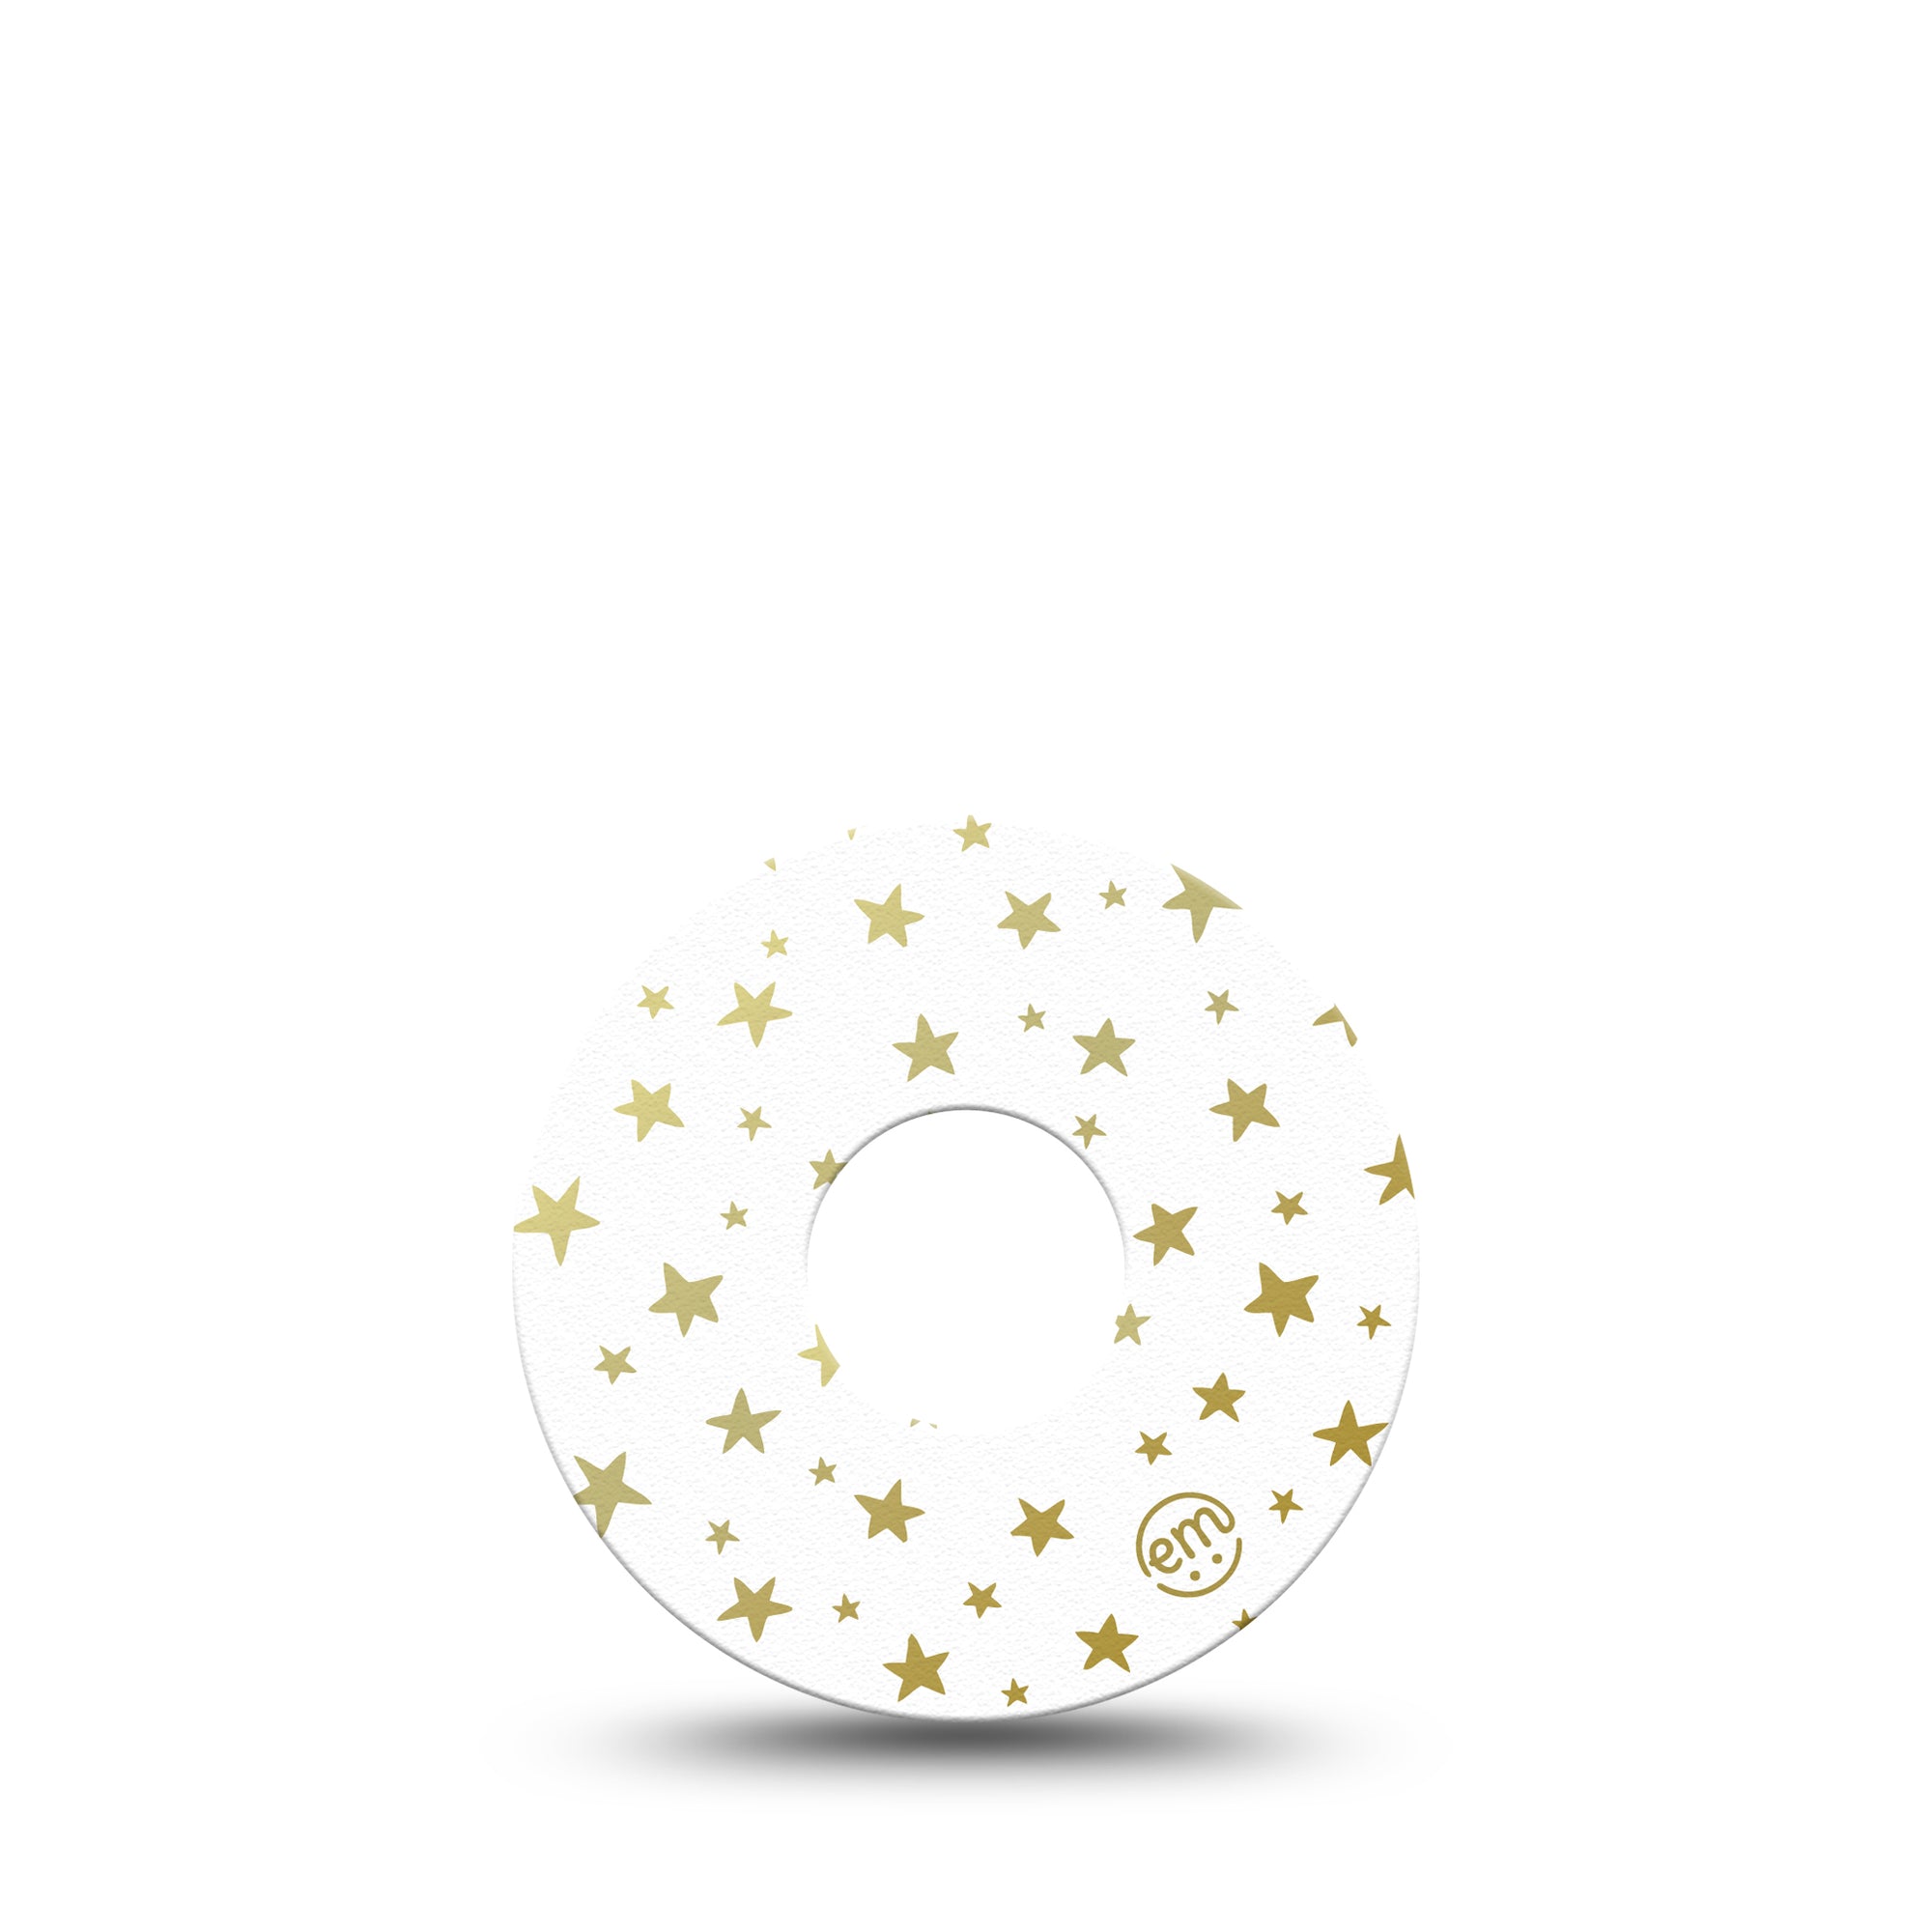 ExpressionMed Twinkling Stars Libre 3 Tape, Single, Shining Stars Inspired, CGM Patch Design